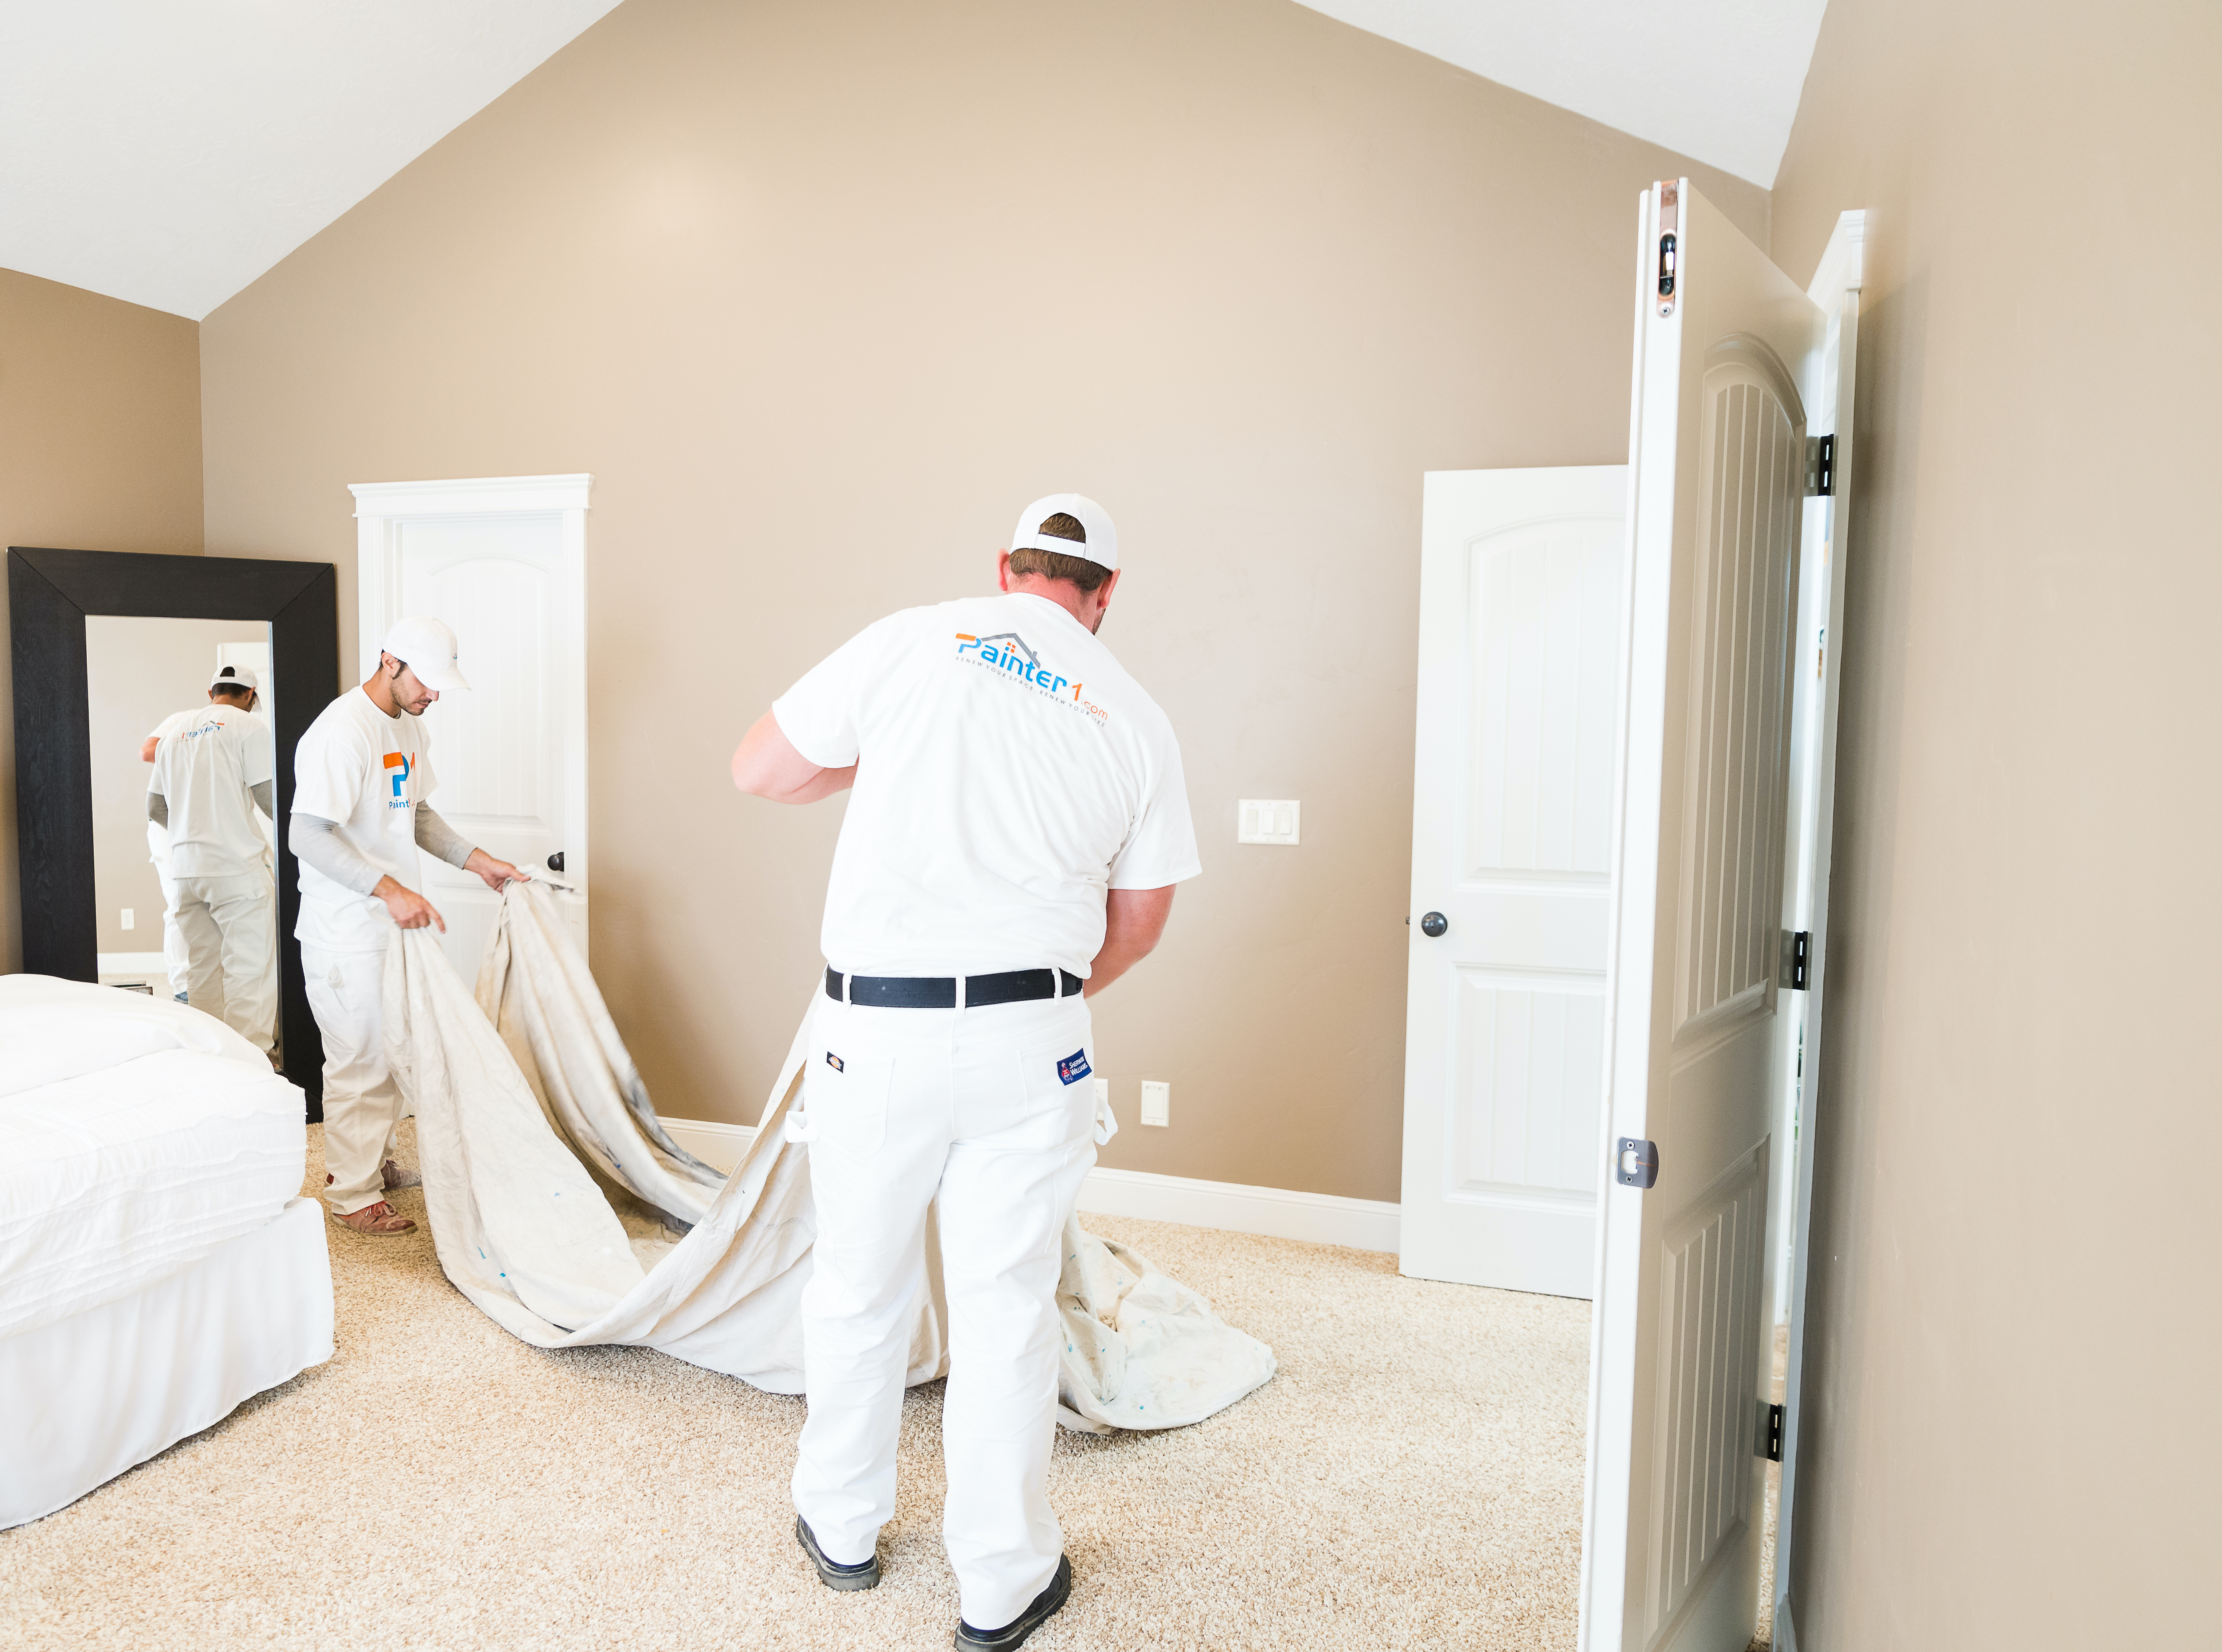 Painter1 Wasatch Summit has top rated interior painters in Park City / Heber Valley.